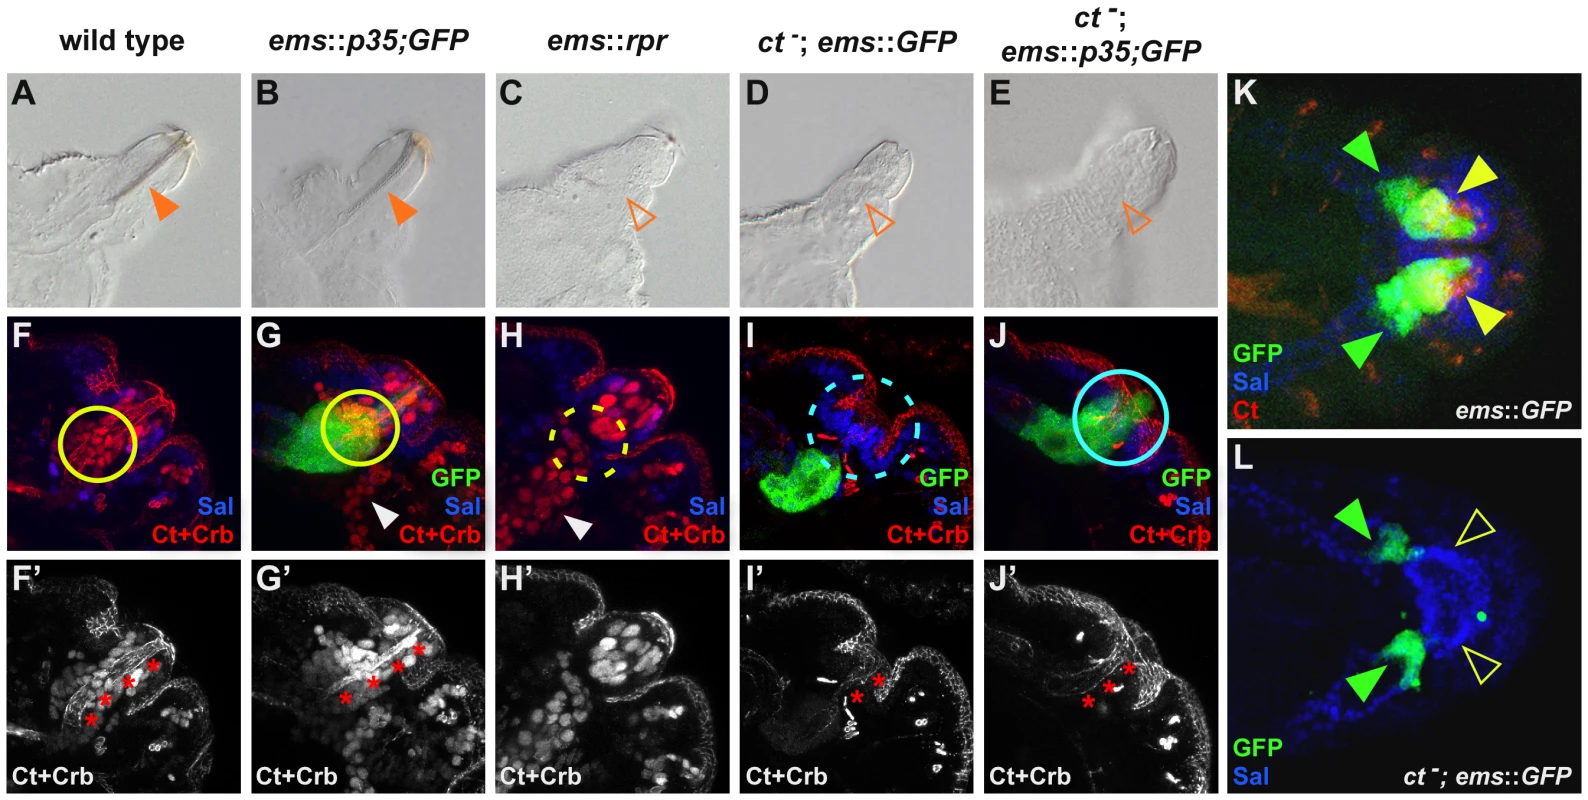 Cut-dependent repression of apoptosis is required for cell survival and differentiation.